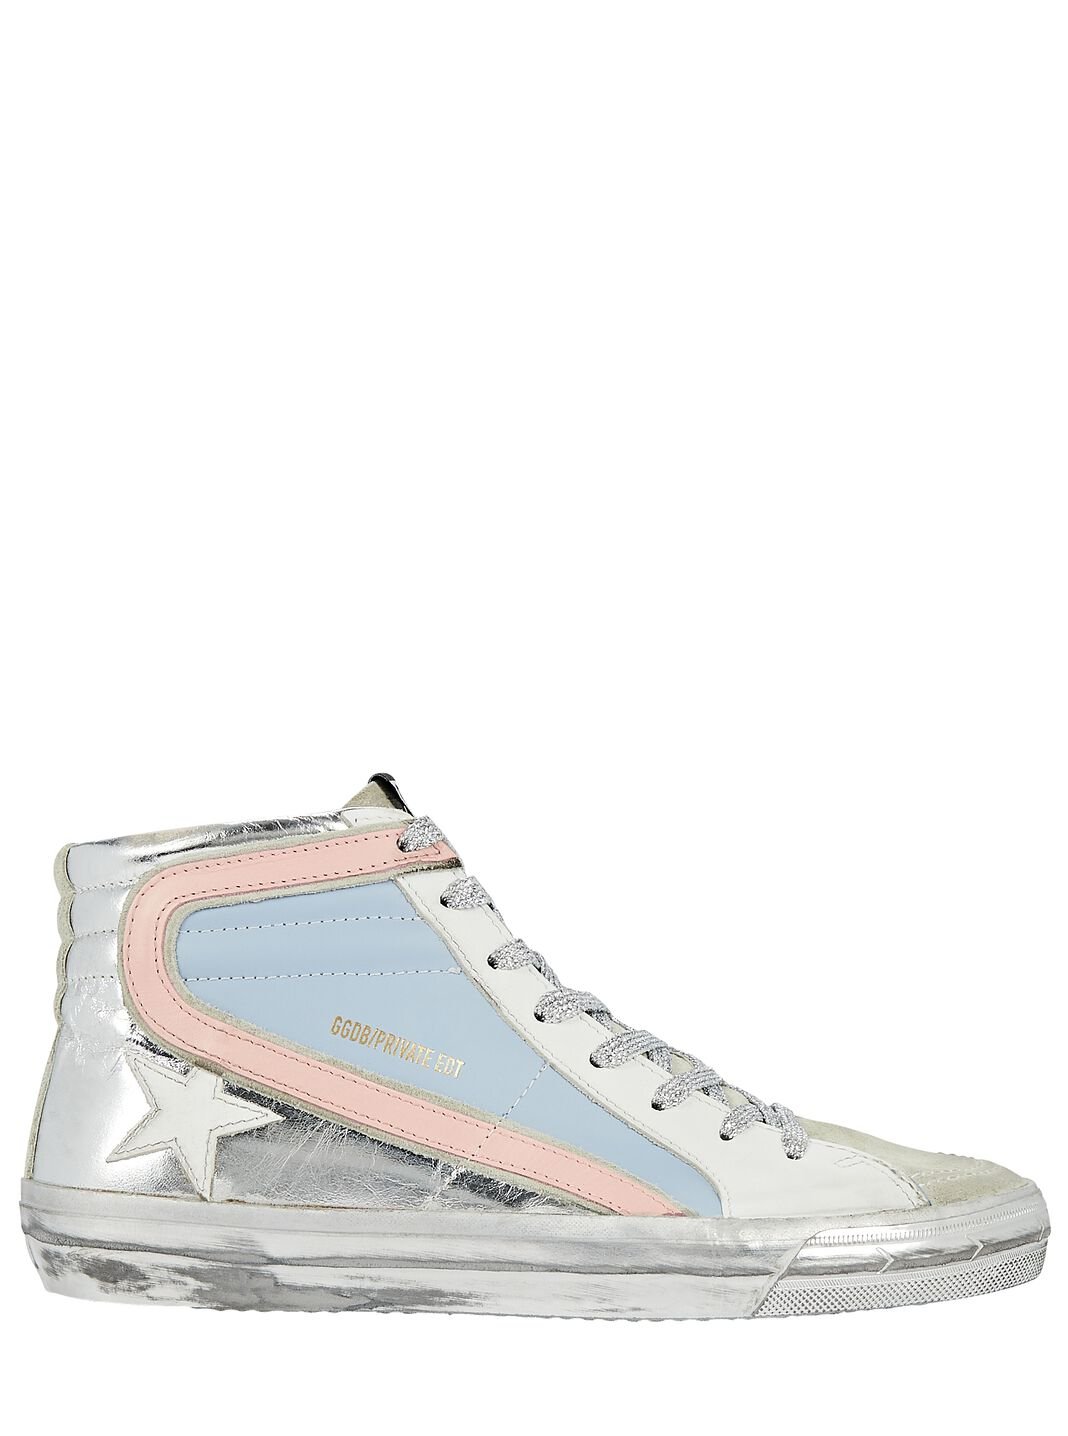 Slide Leather High-Top Sneakers